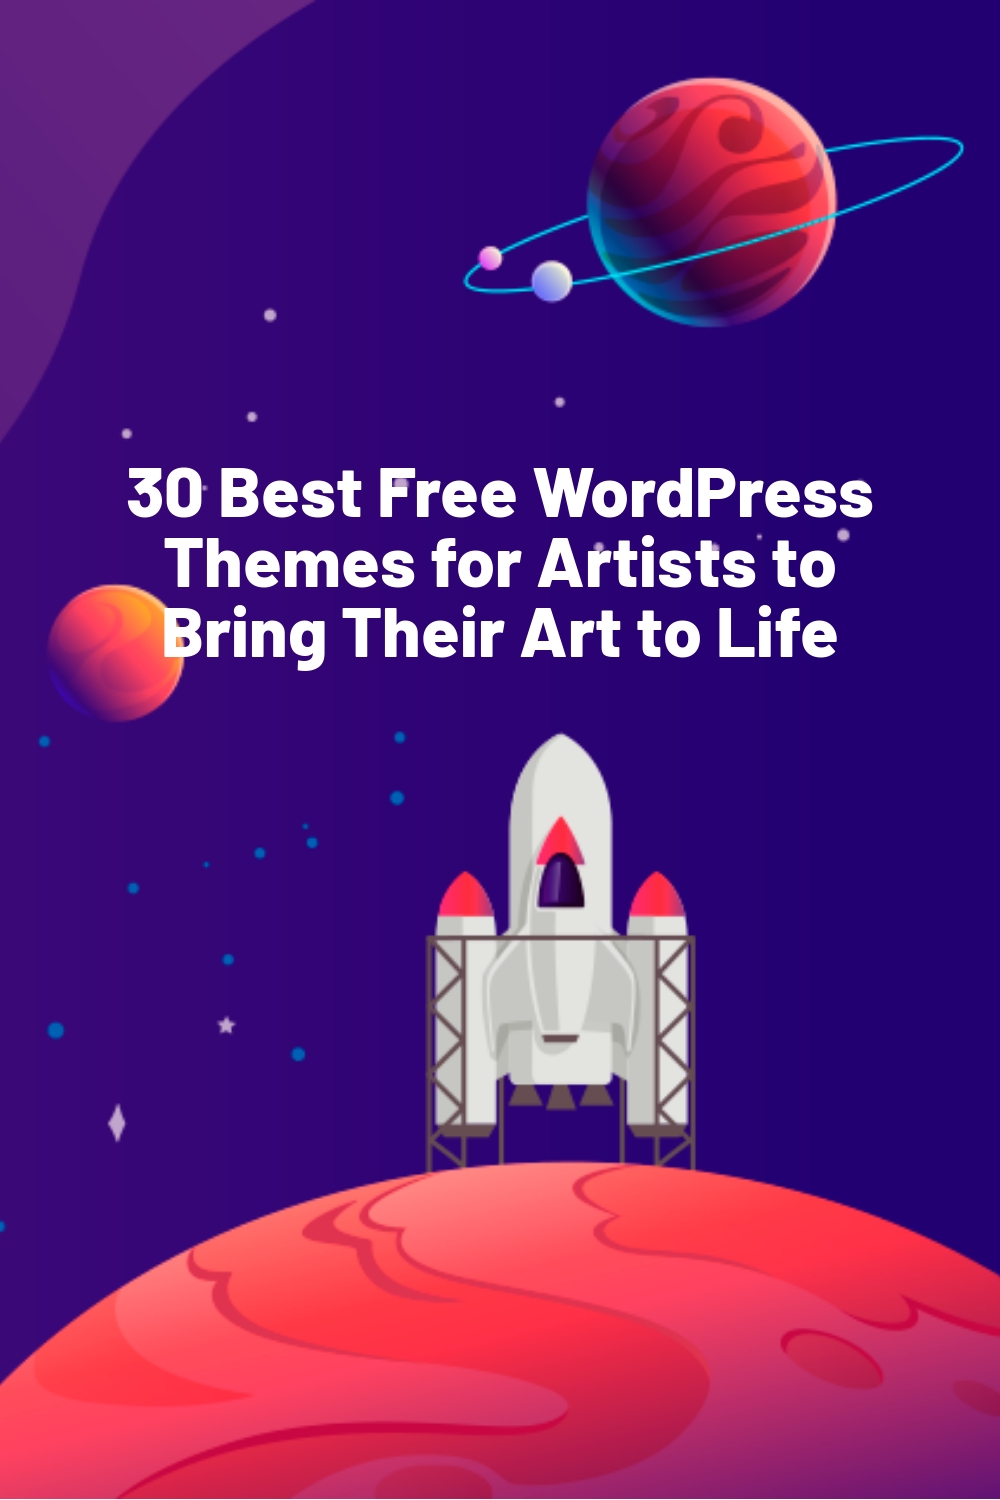 30 Best Free WordPress Themes for Artists to Bring Their Art to Life